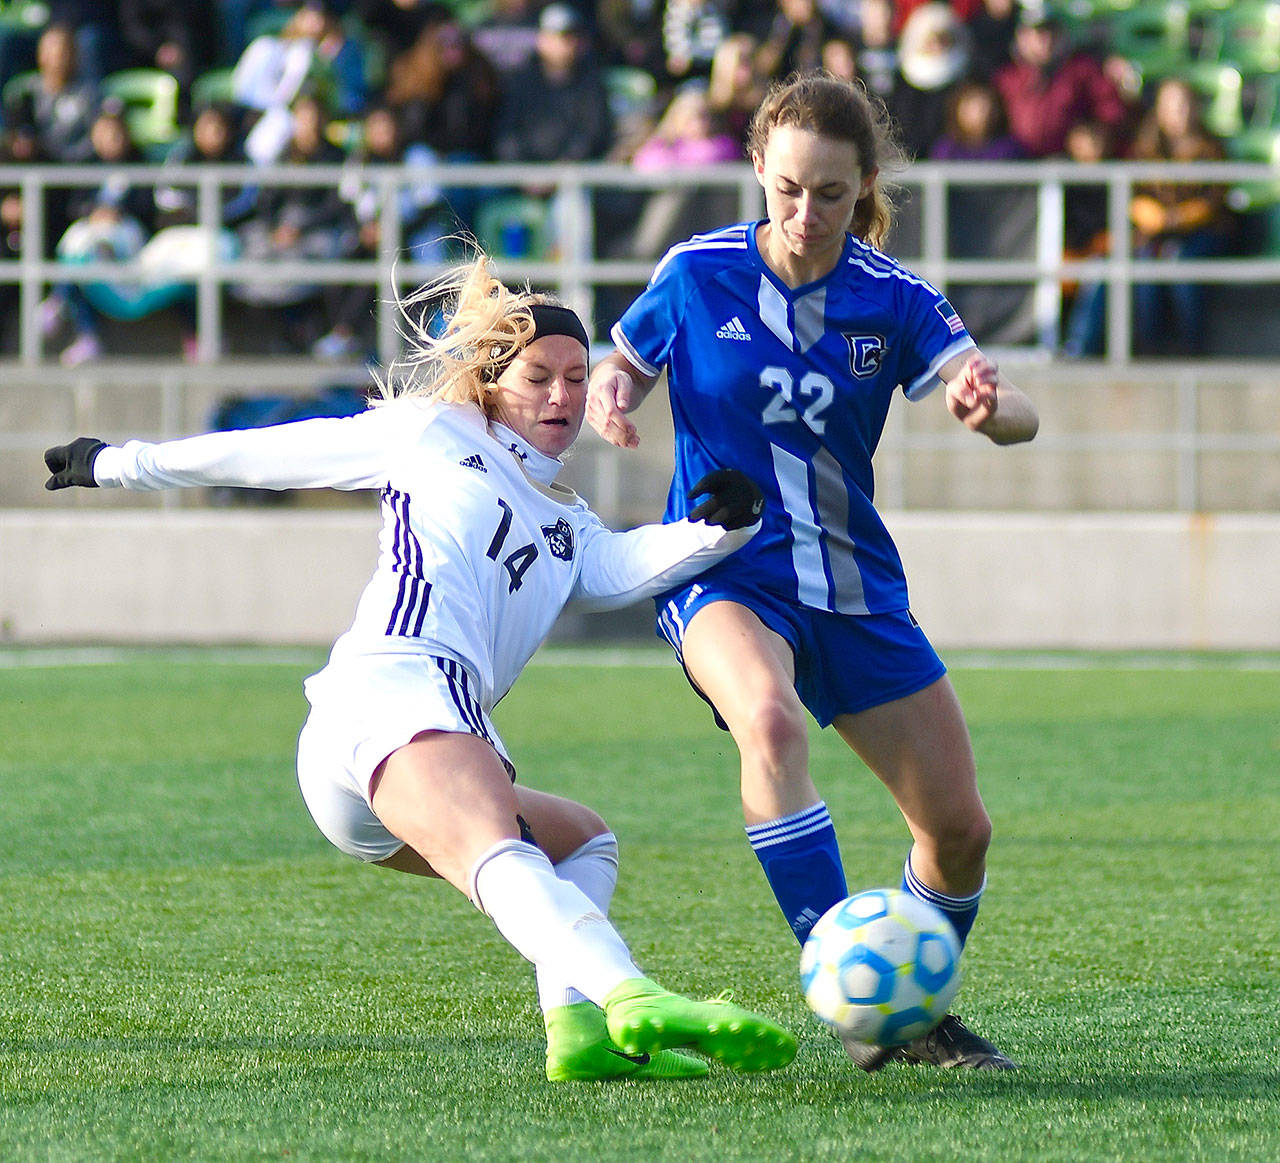 Peninsula Taylor Graham battles for a loose ball with Clark’s Julie Williams in the NWAC championship match in Tukwila Sunday. The Peninsula women won 2-0 to win the NWAC championship. Photo by Jay Cline